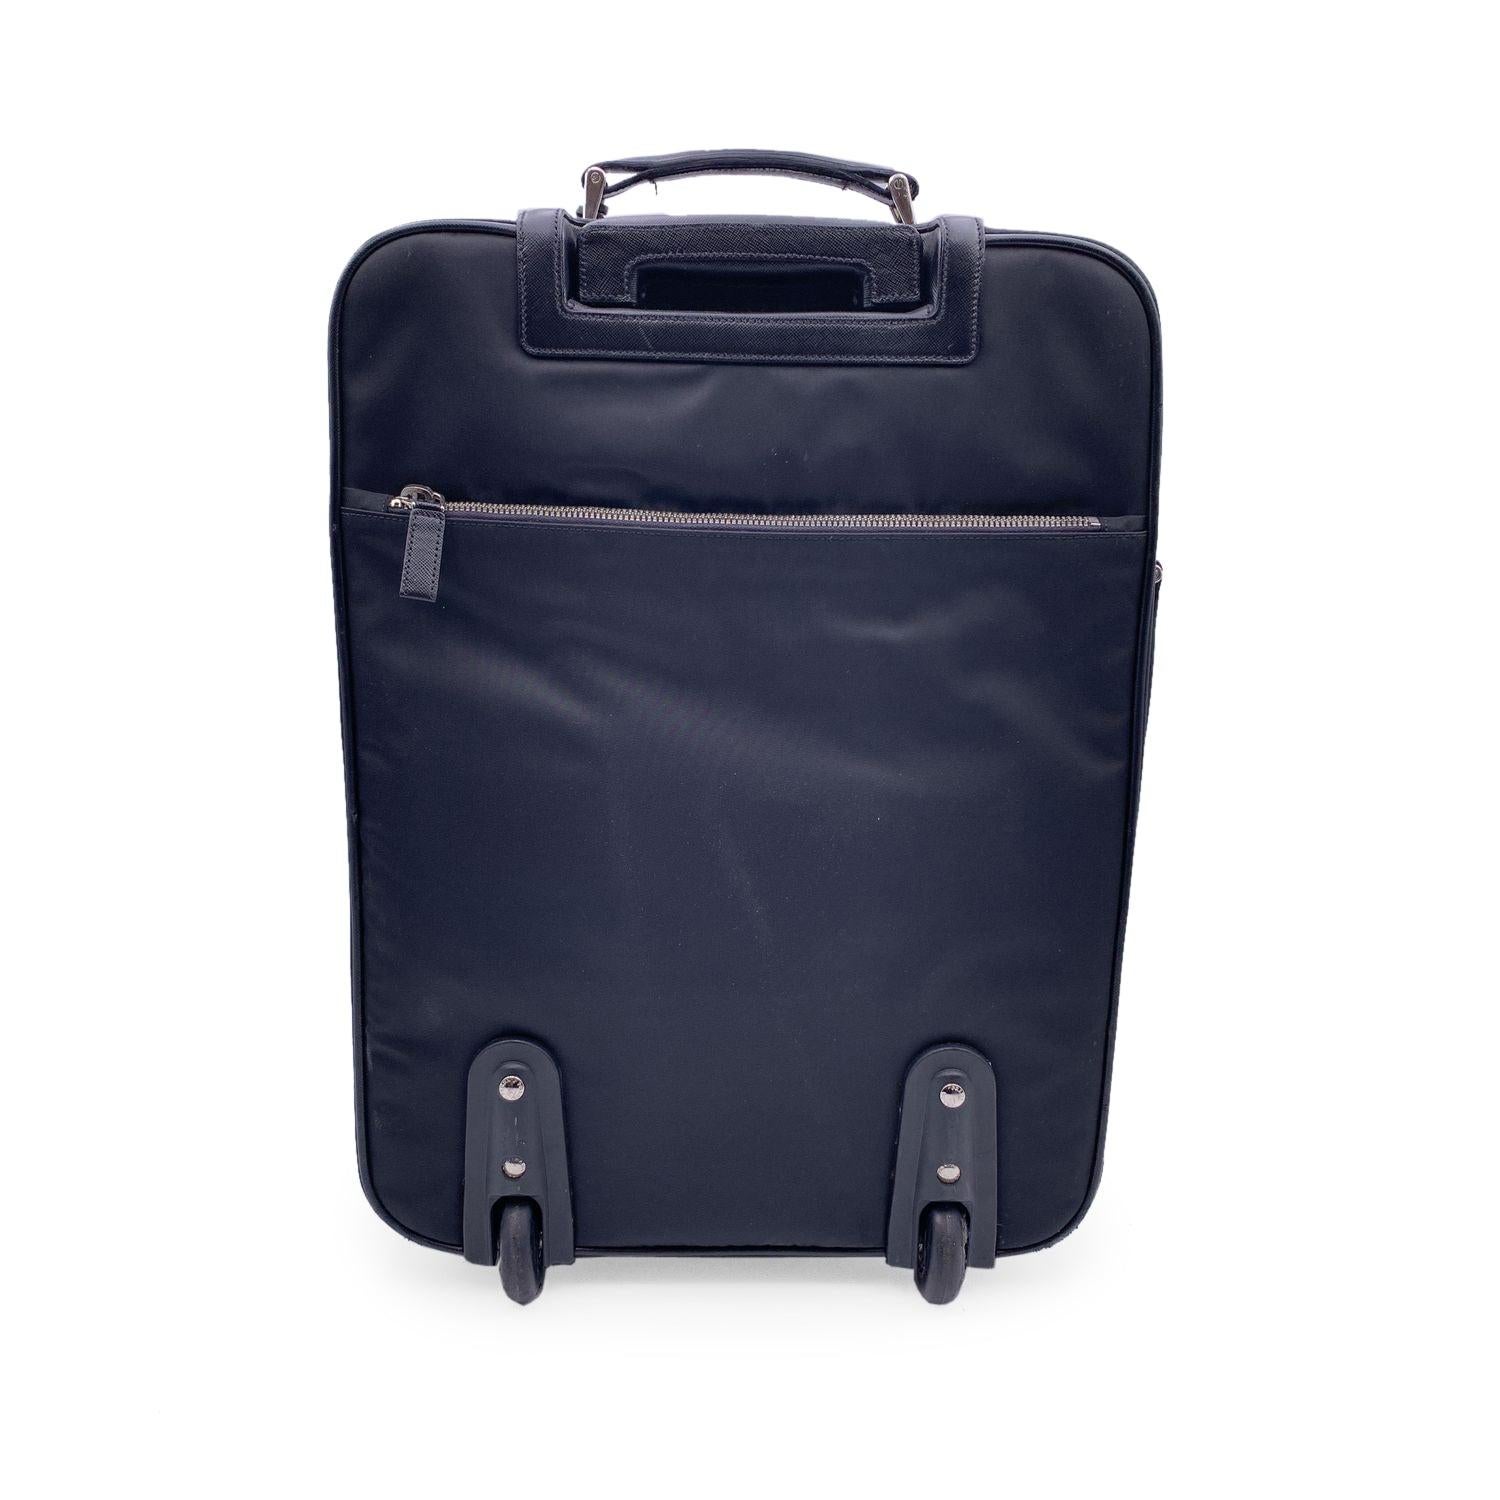 Prada Black Nylon Rolling Suitcase Trolley Luggage Travel Bag In Excellent Condition In Rome, Rome